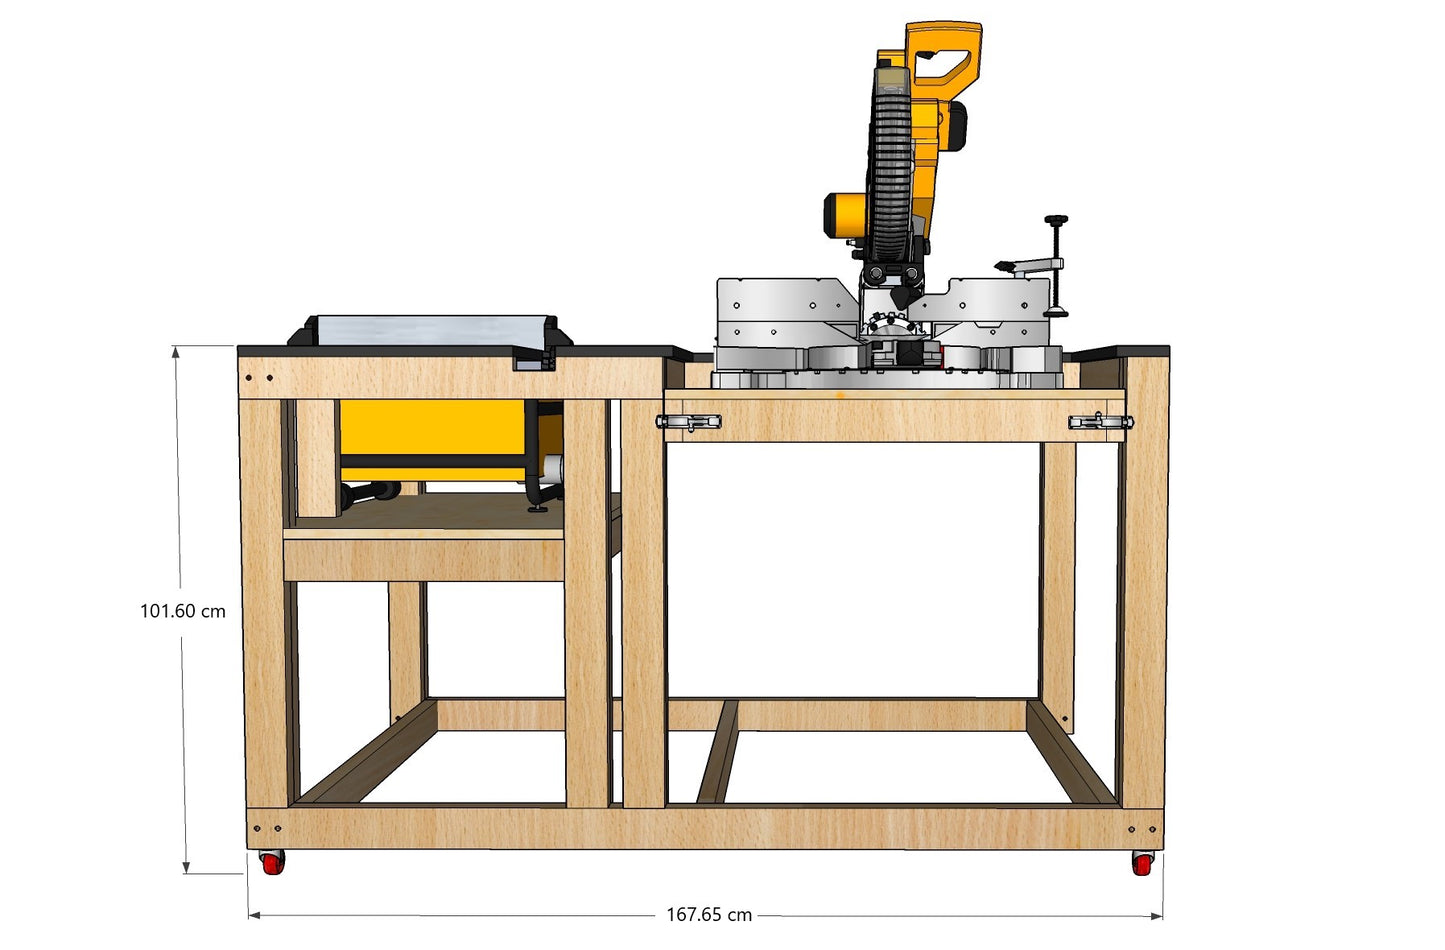 Compact Mobile Workbench Plans for Miter / Table Saw - Instant PDF Download - Metric Units